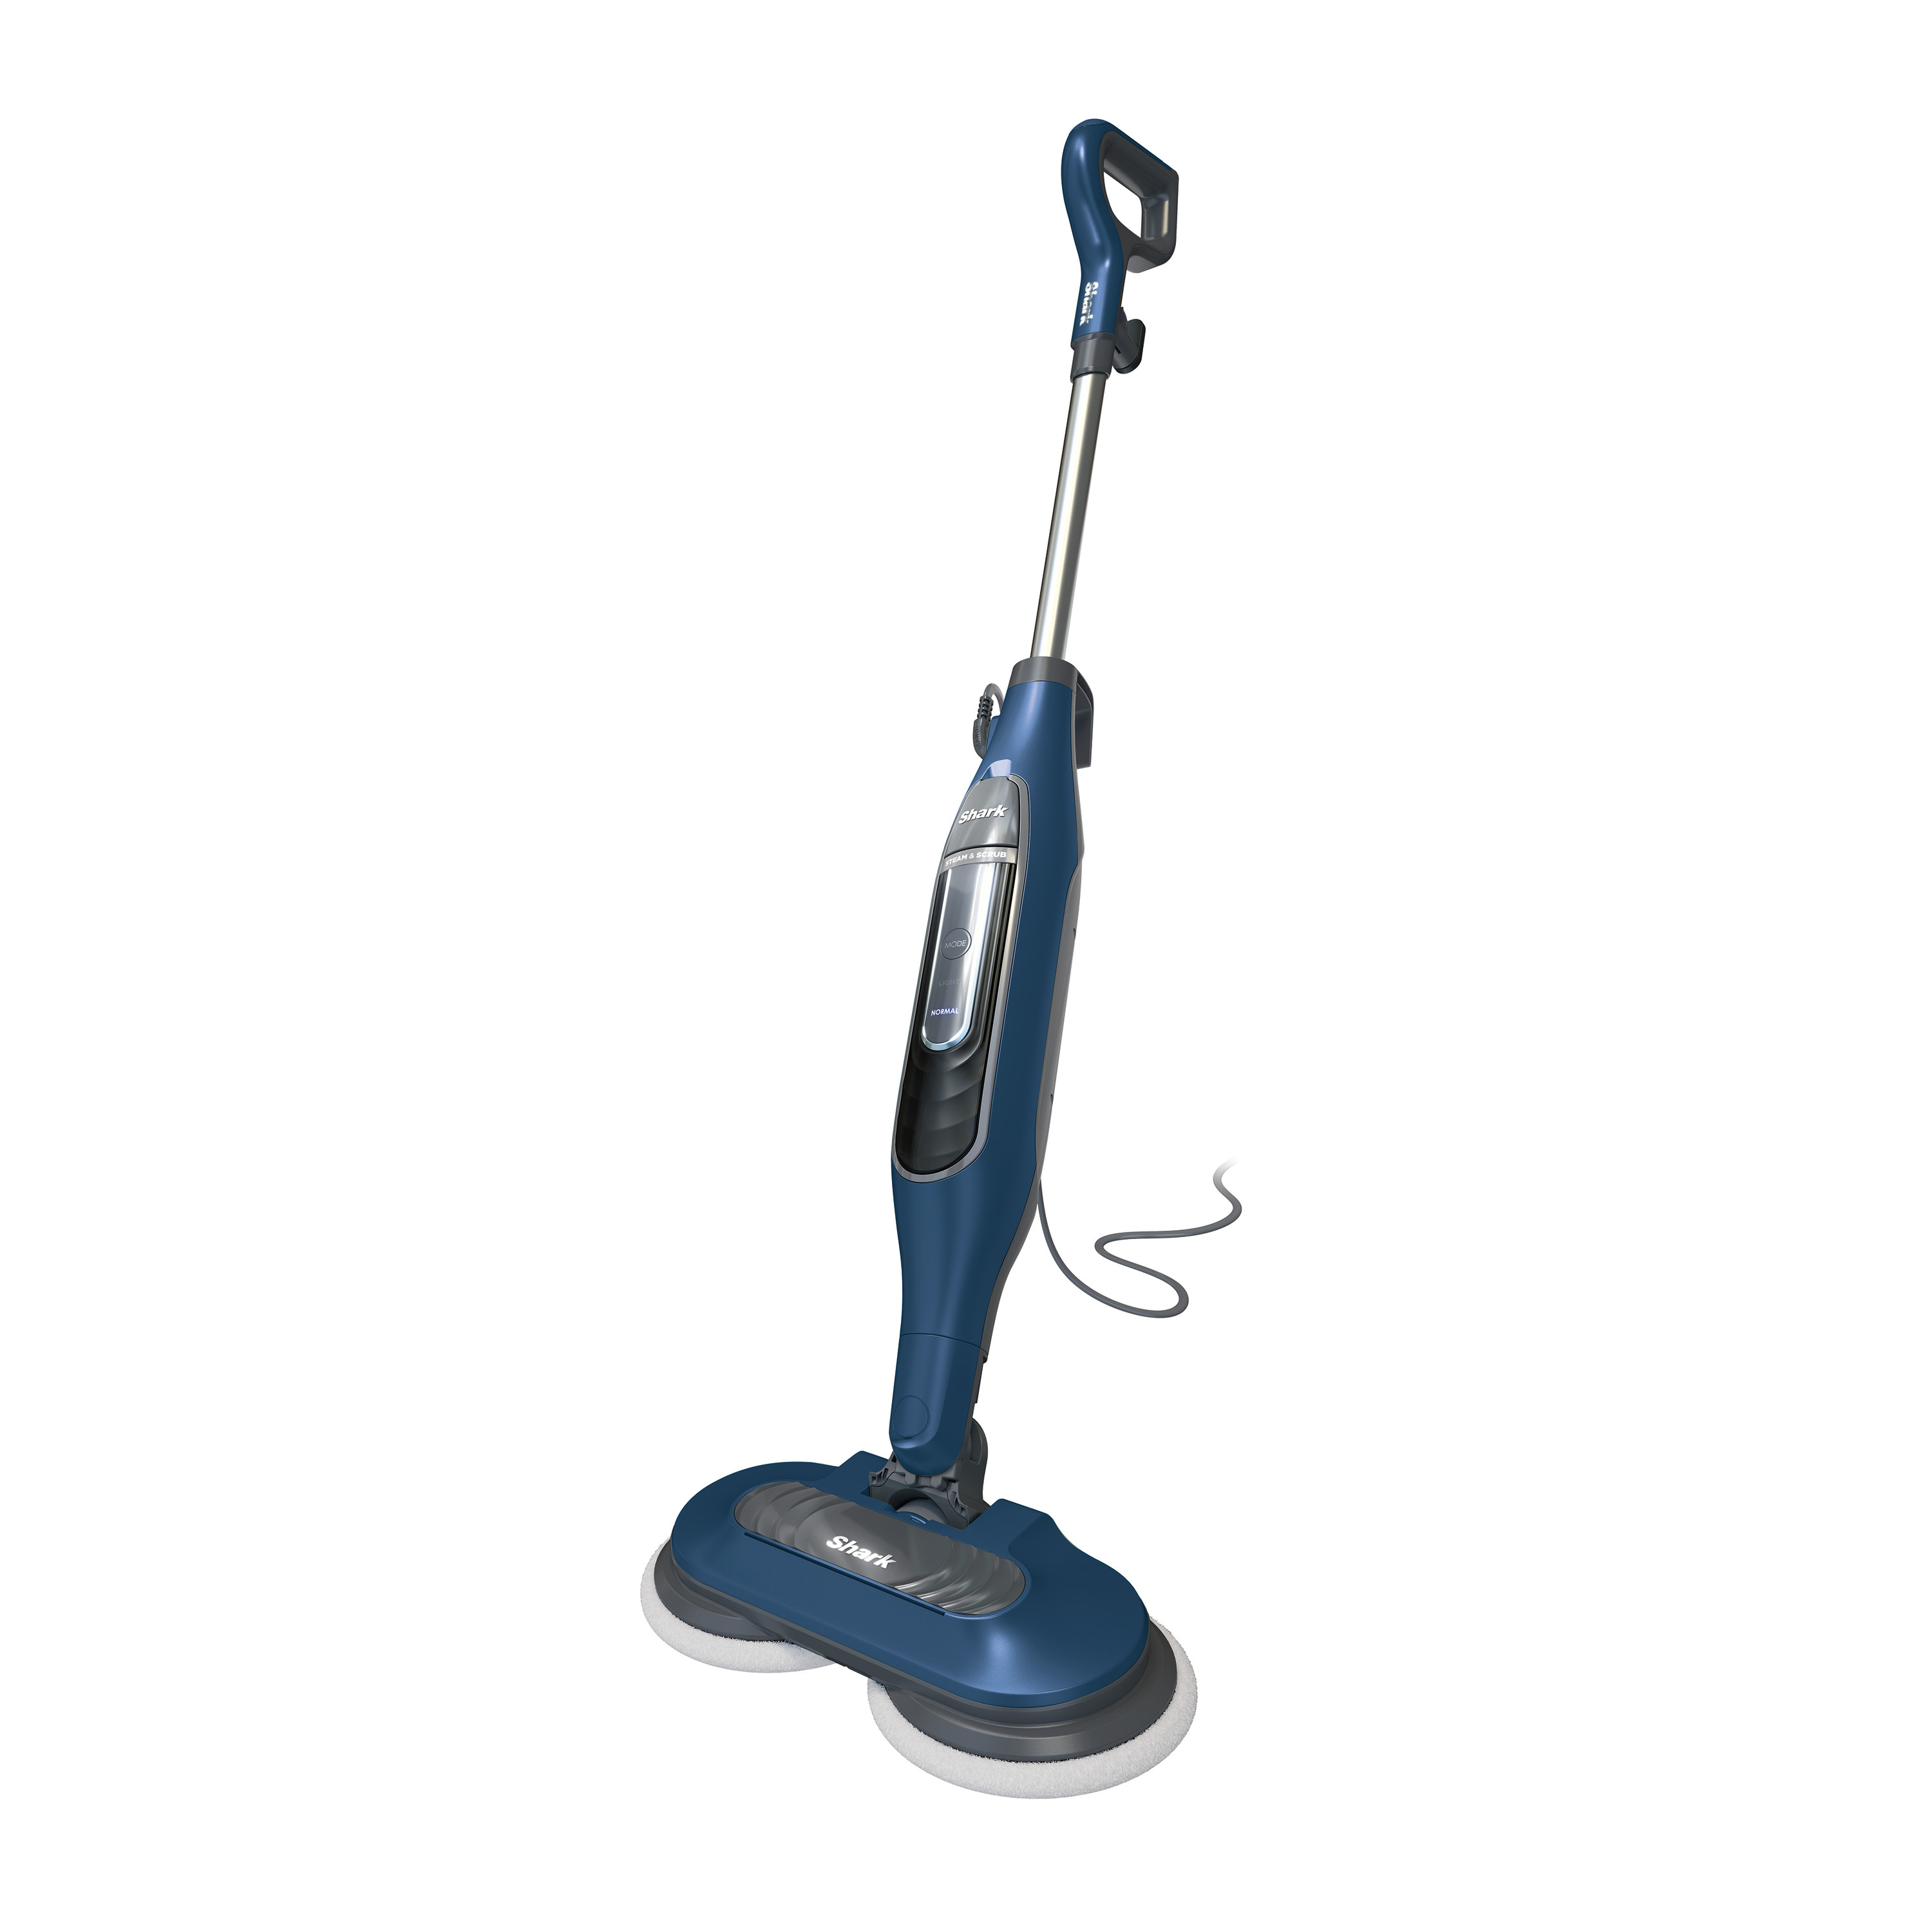 Shark® Steam & Scrub All-in-One Scrubbing and Sanitizing Hard Floor Steam Mop S7020 - image 2 of 13